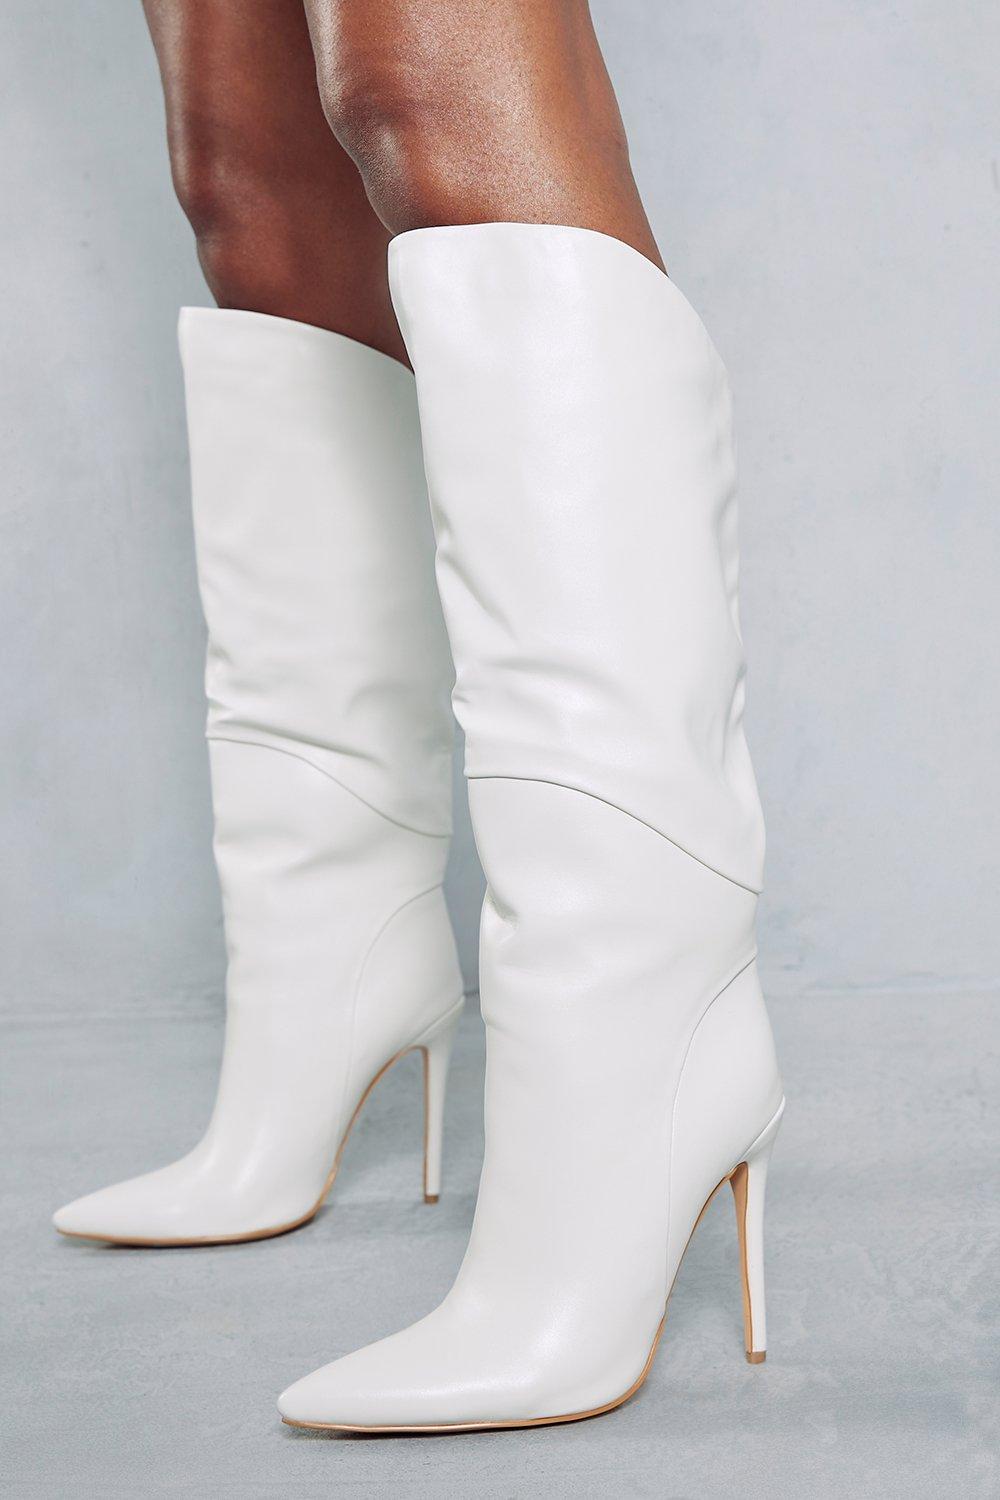 womens leather look dipped knee high boots - white - 3, white